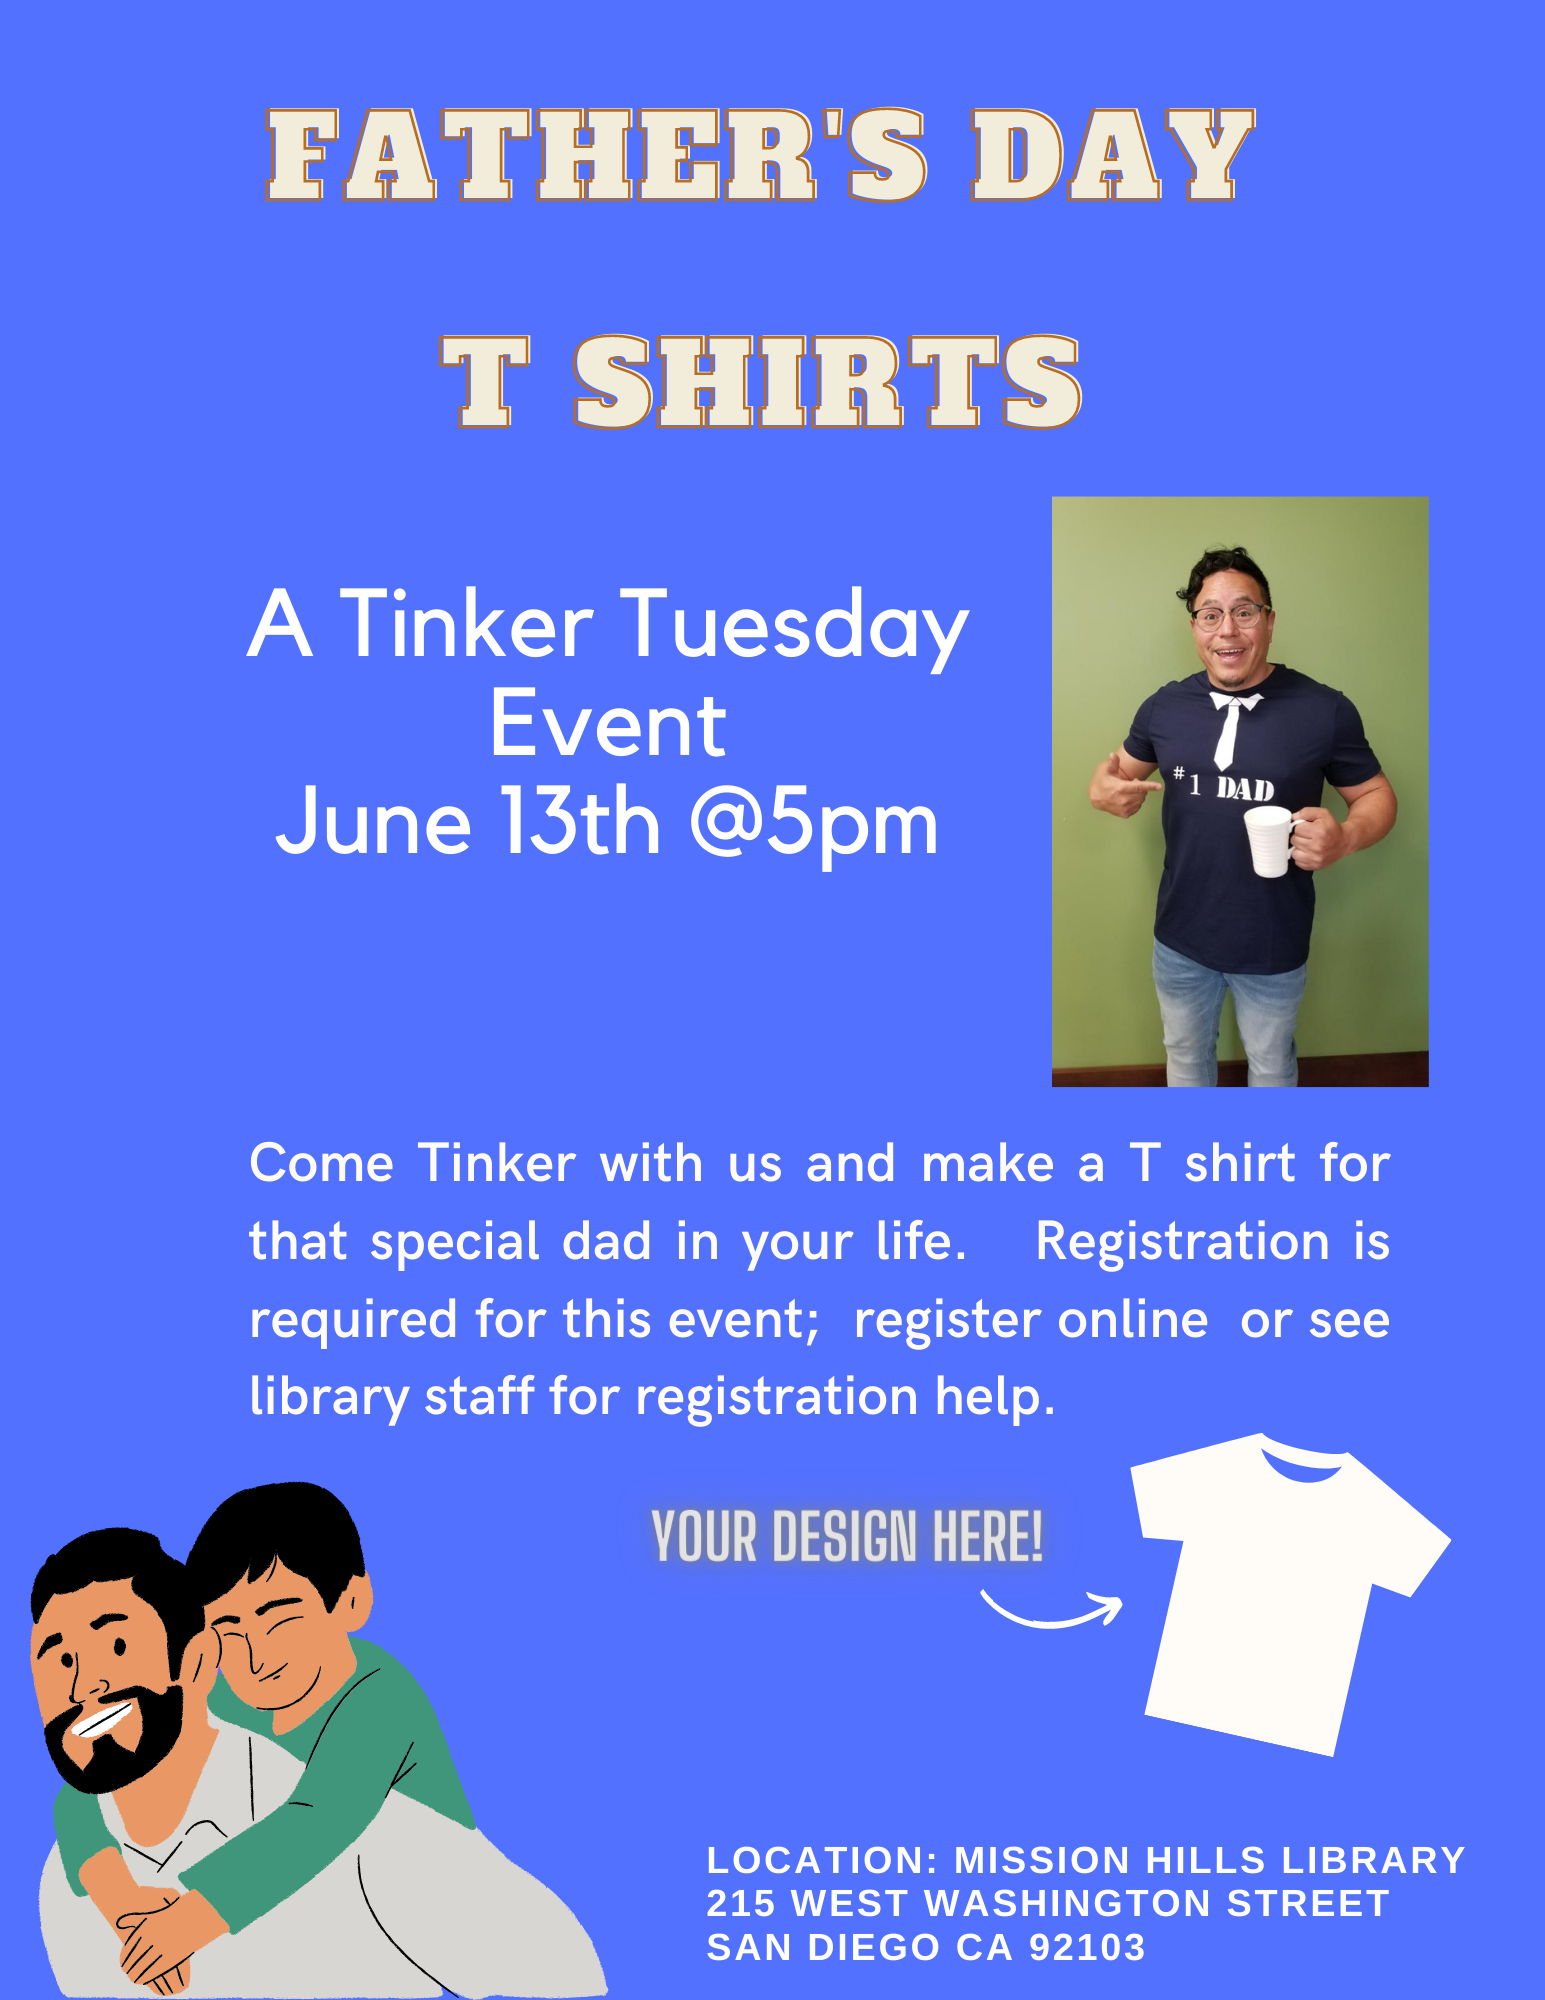 Fathers' Day T-shirt Event